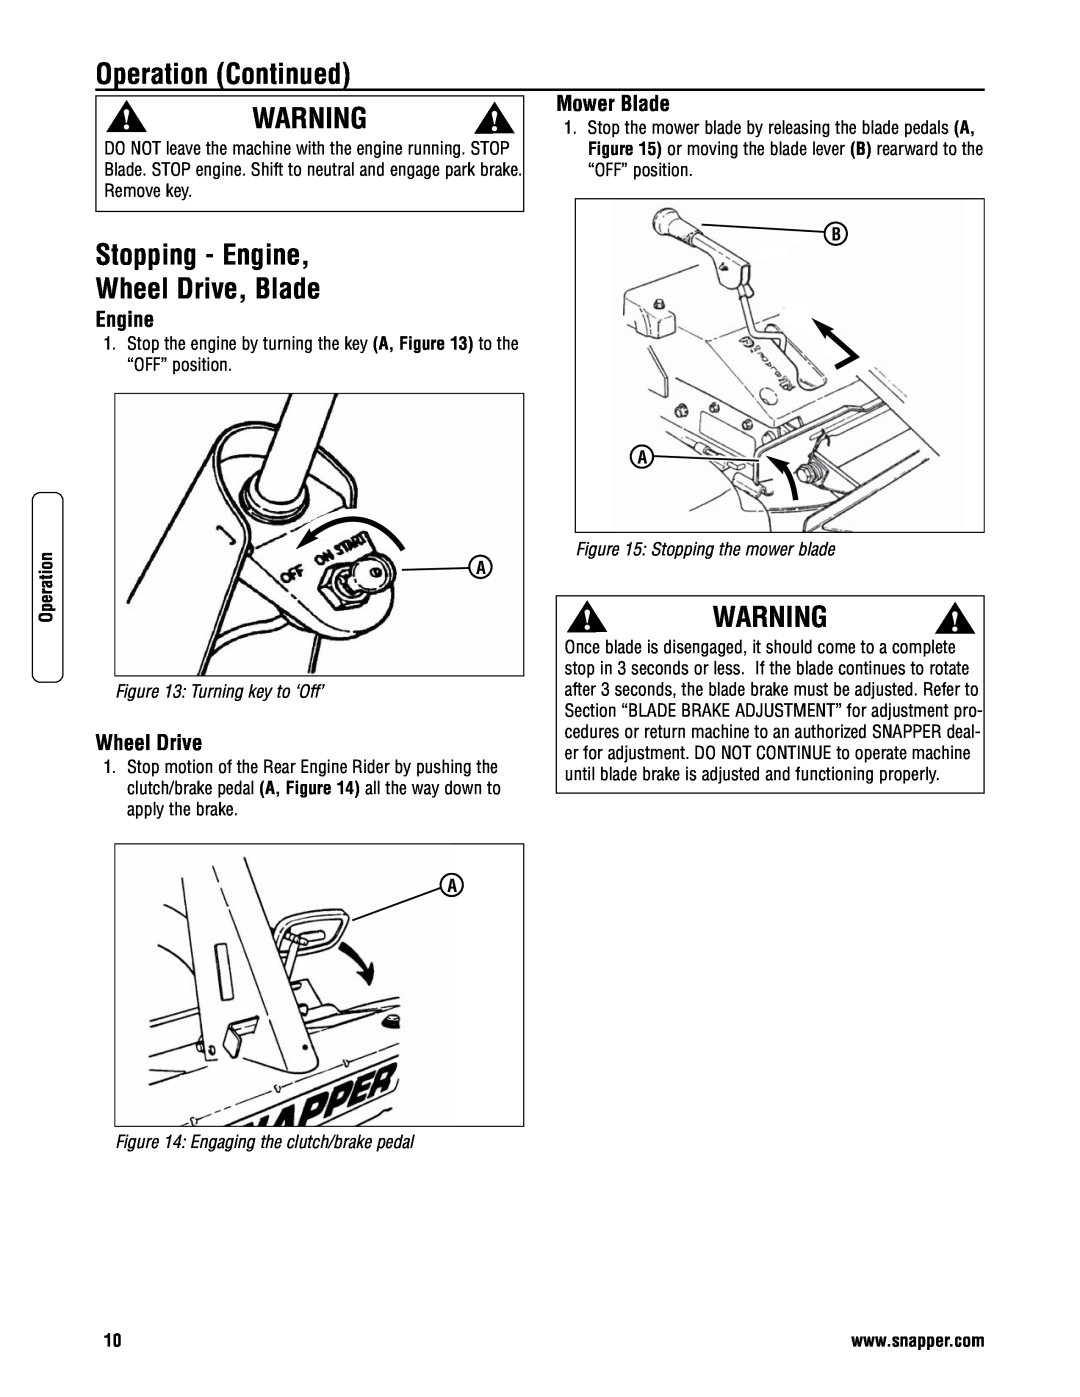 Snapper 3317523BVE Stopping - Engine Wheel Drive, Blade, Turning key to ‘Off’, Stopping the mower blade, Mower Blade 